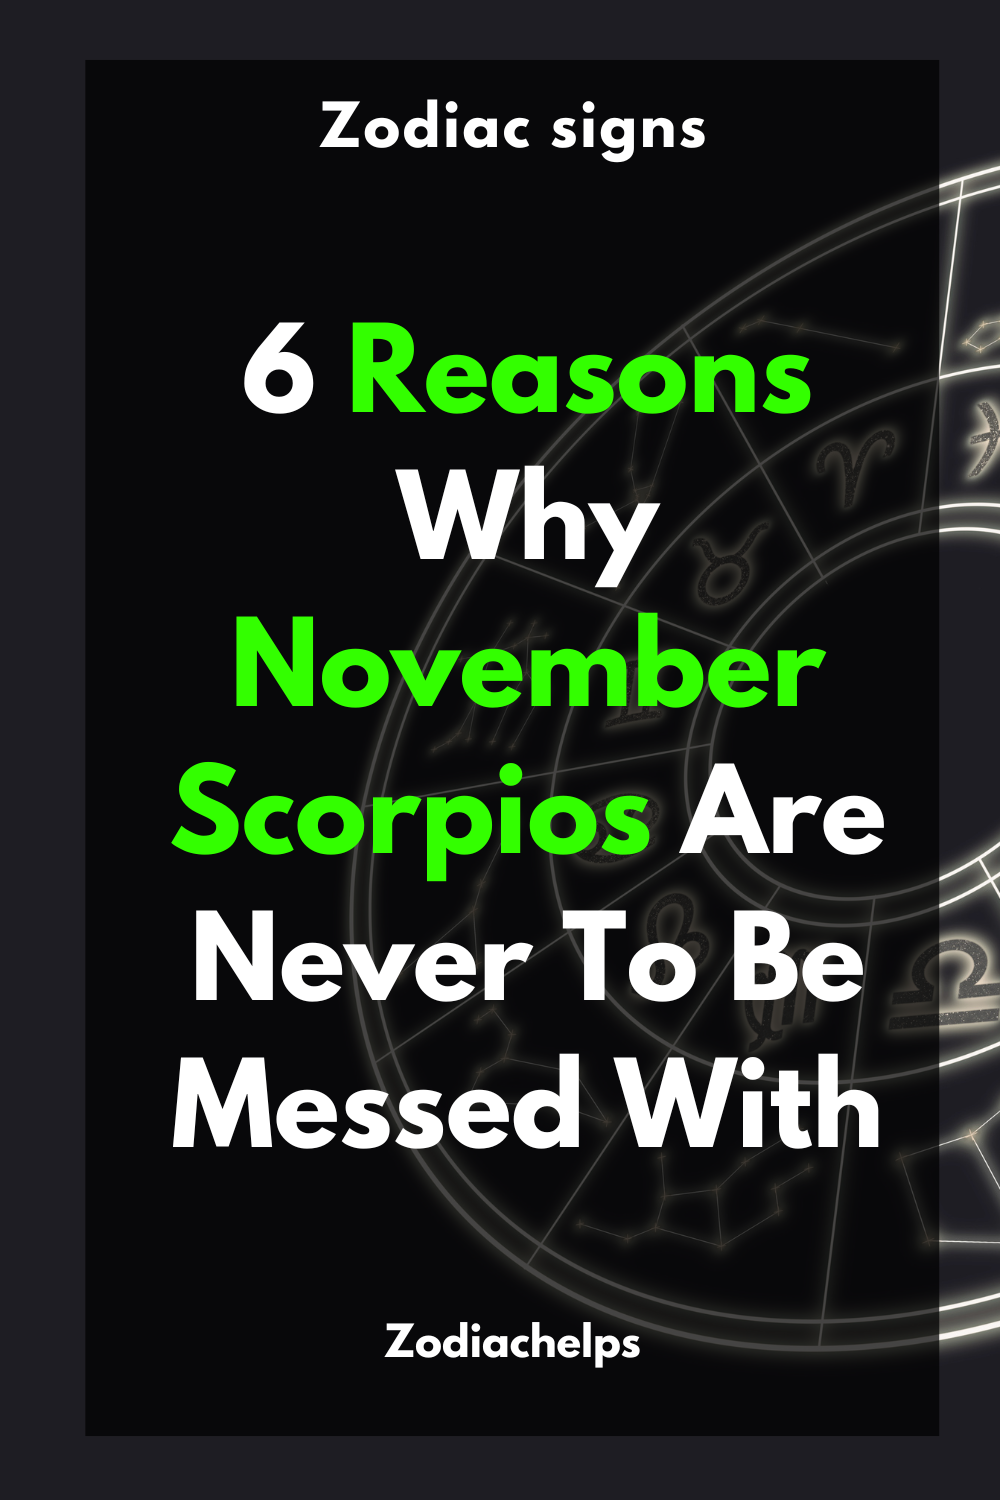 6 Reasons Why November Scorpios Are Never To Be Messed With